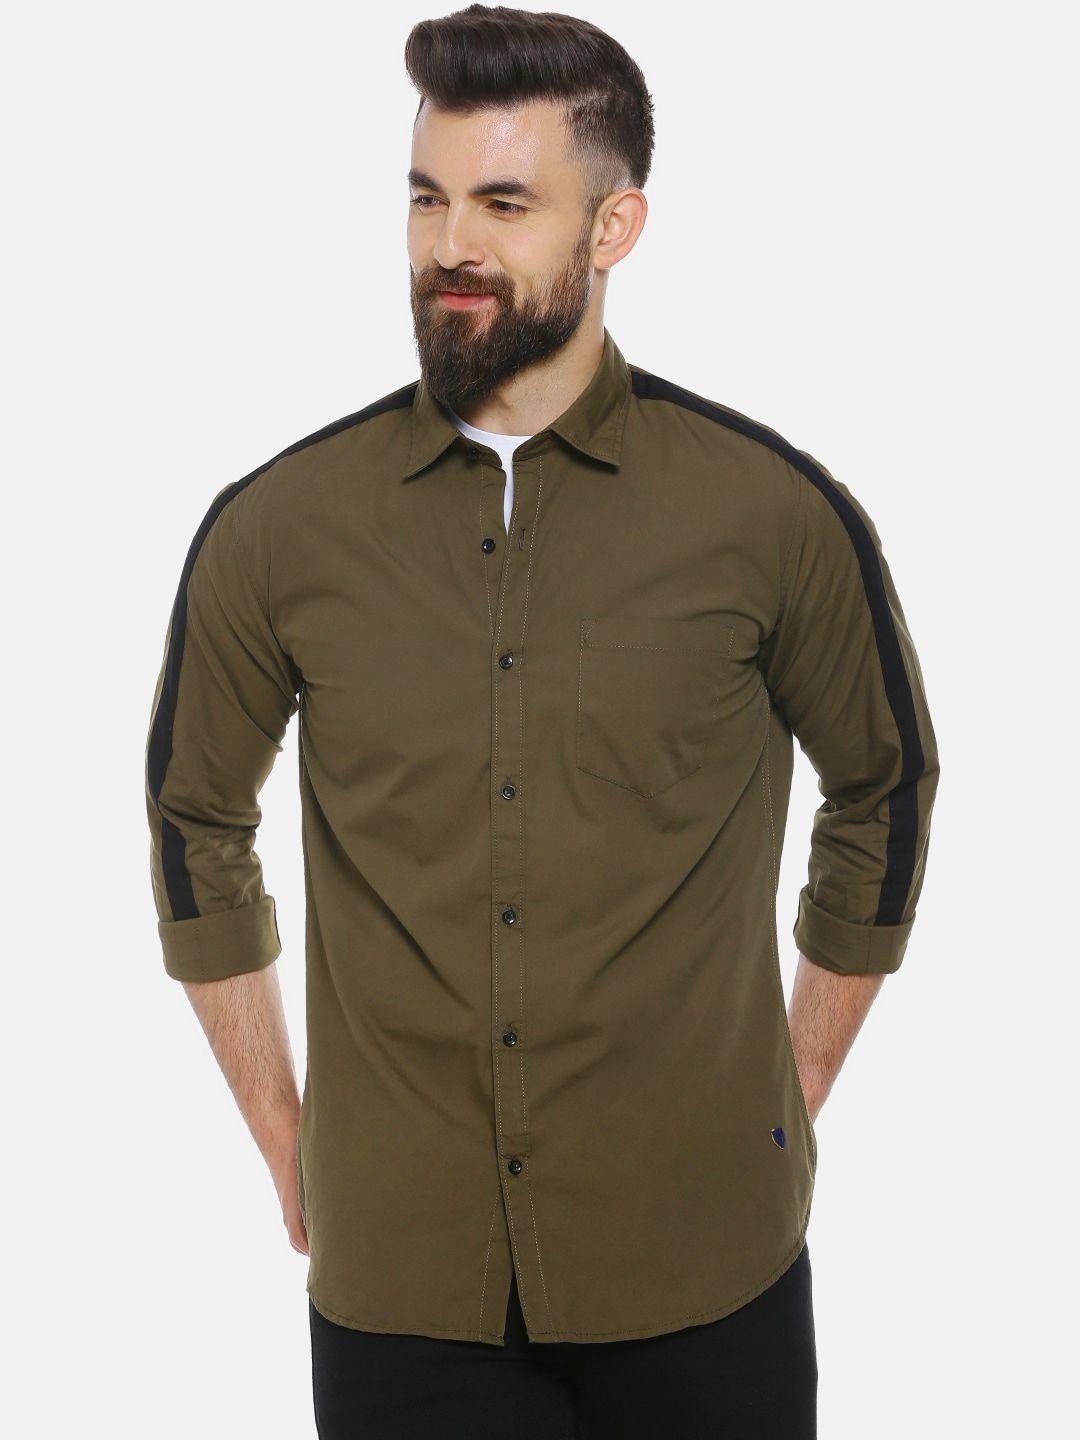 campus-sutra-men-olive-green-casual-shirt